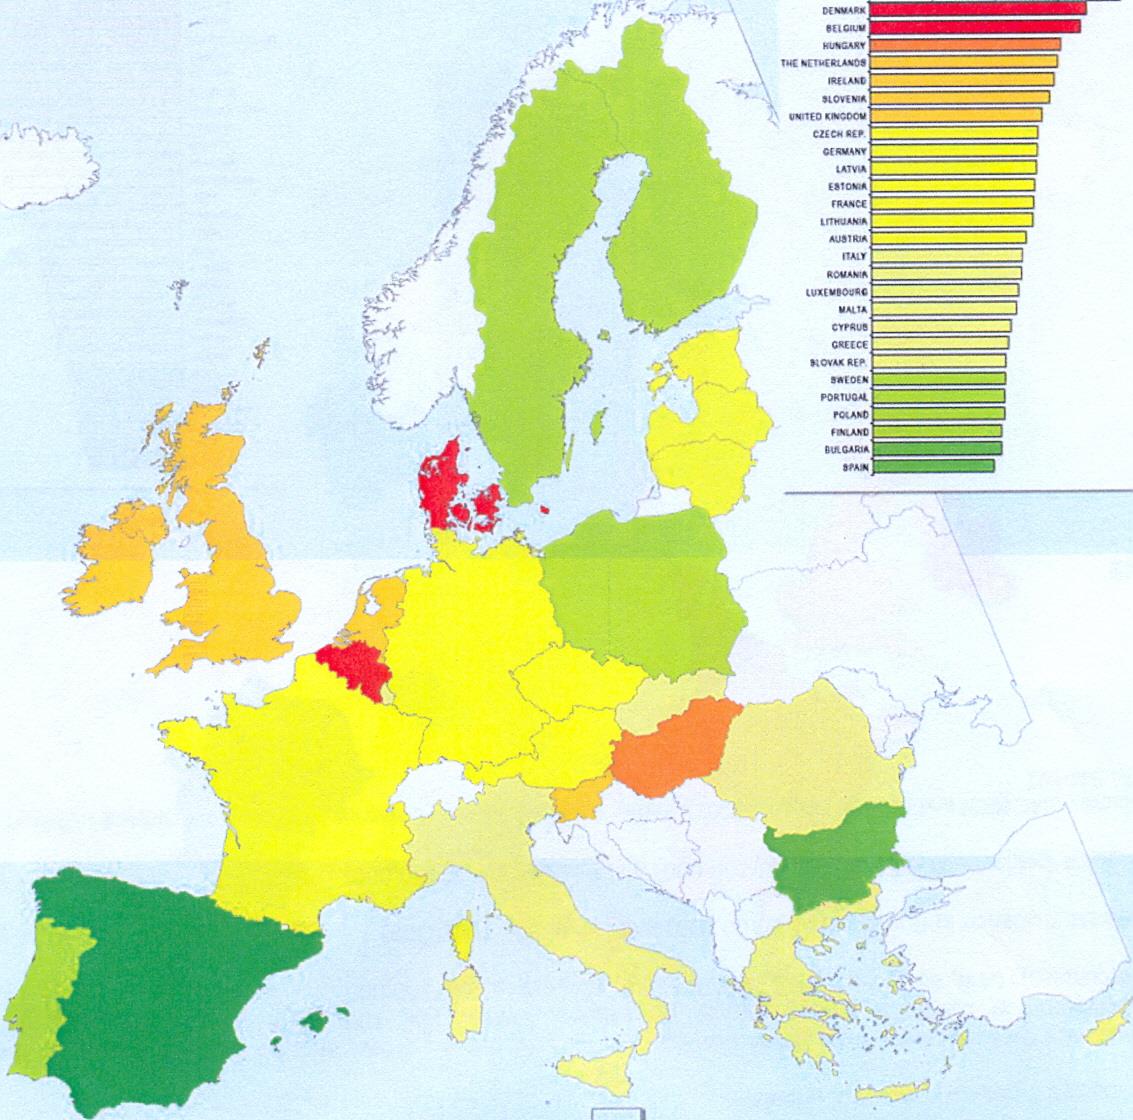 Breast cancer mortality in the EU Member States